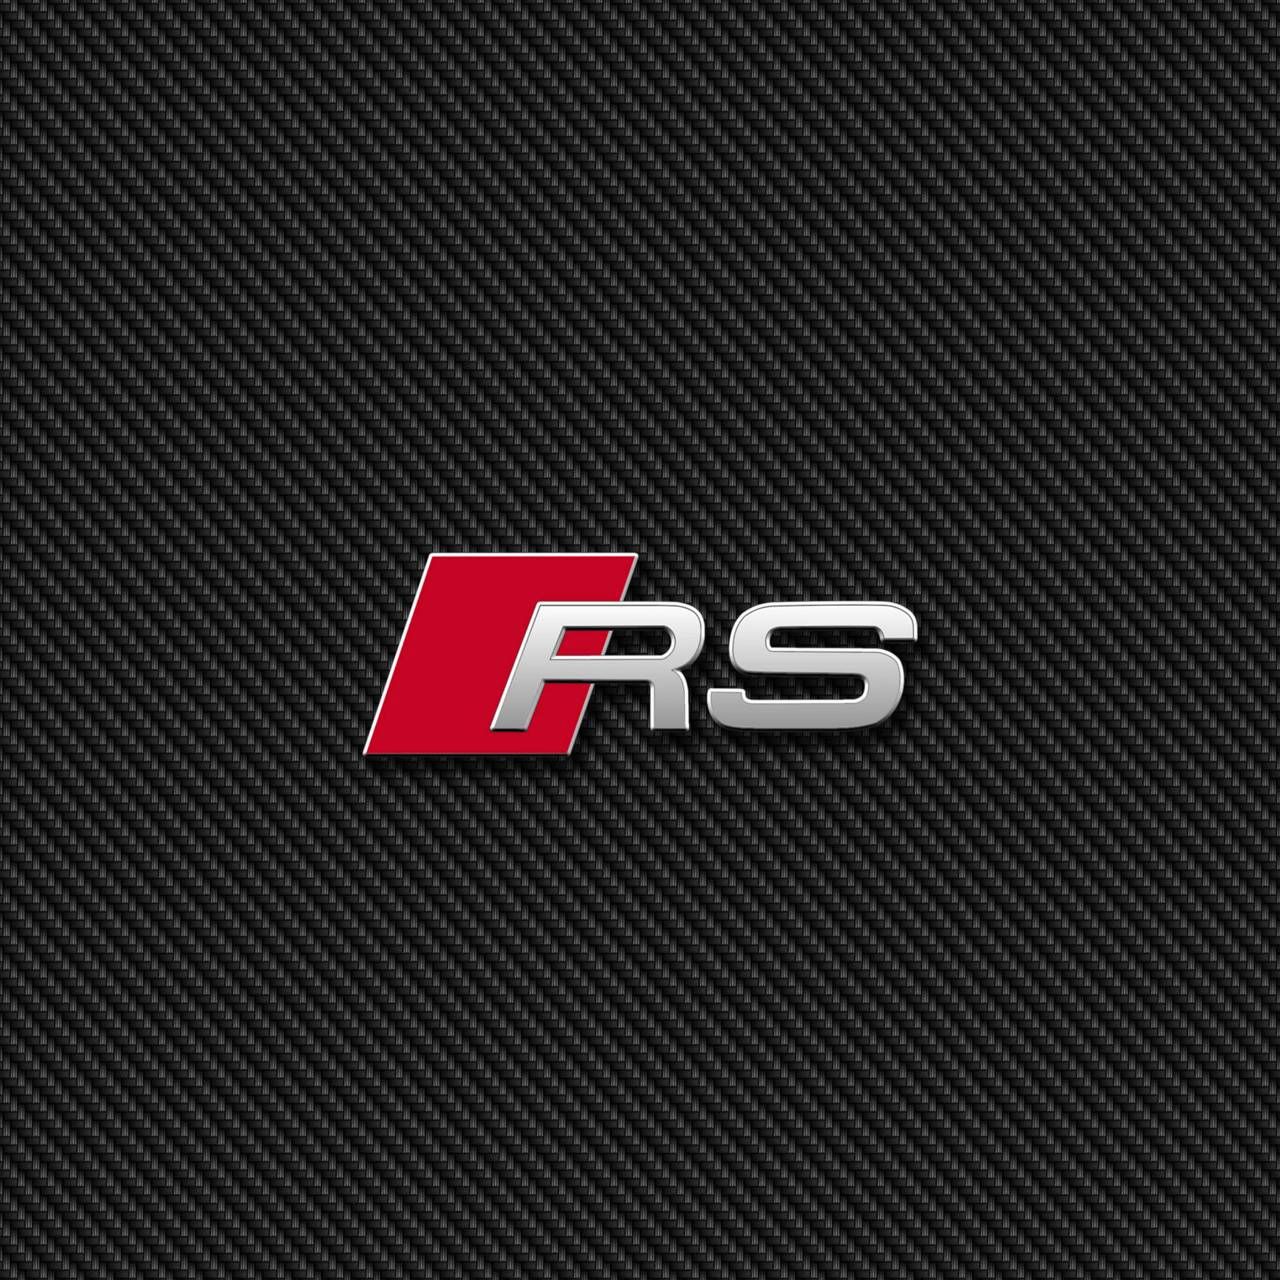 Download Audi RS Badge Carbon wallpaper by bruceiras now. Browse millions of popular audi Wallpaper and. Audi rs, Car wallpaper, Audi cars